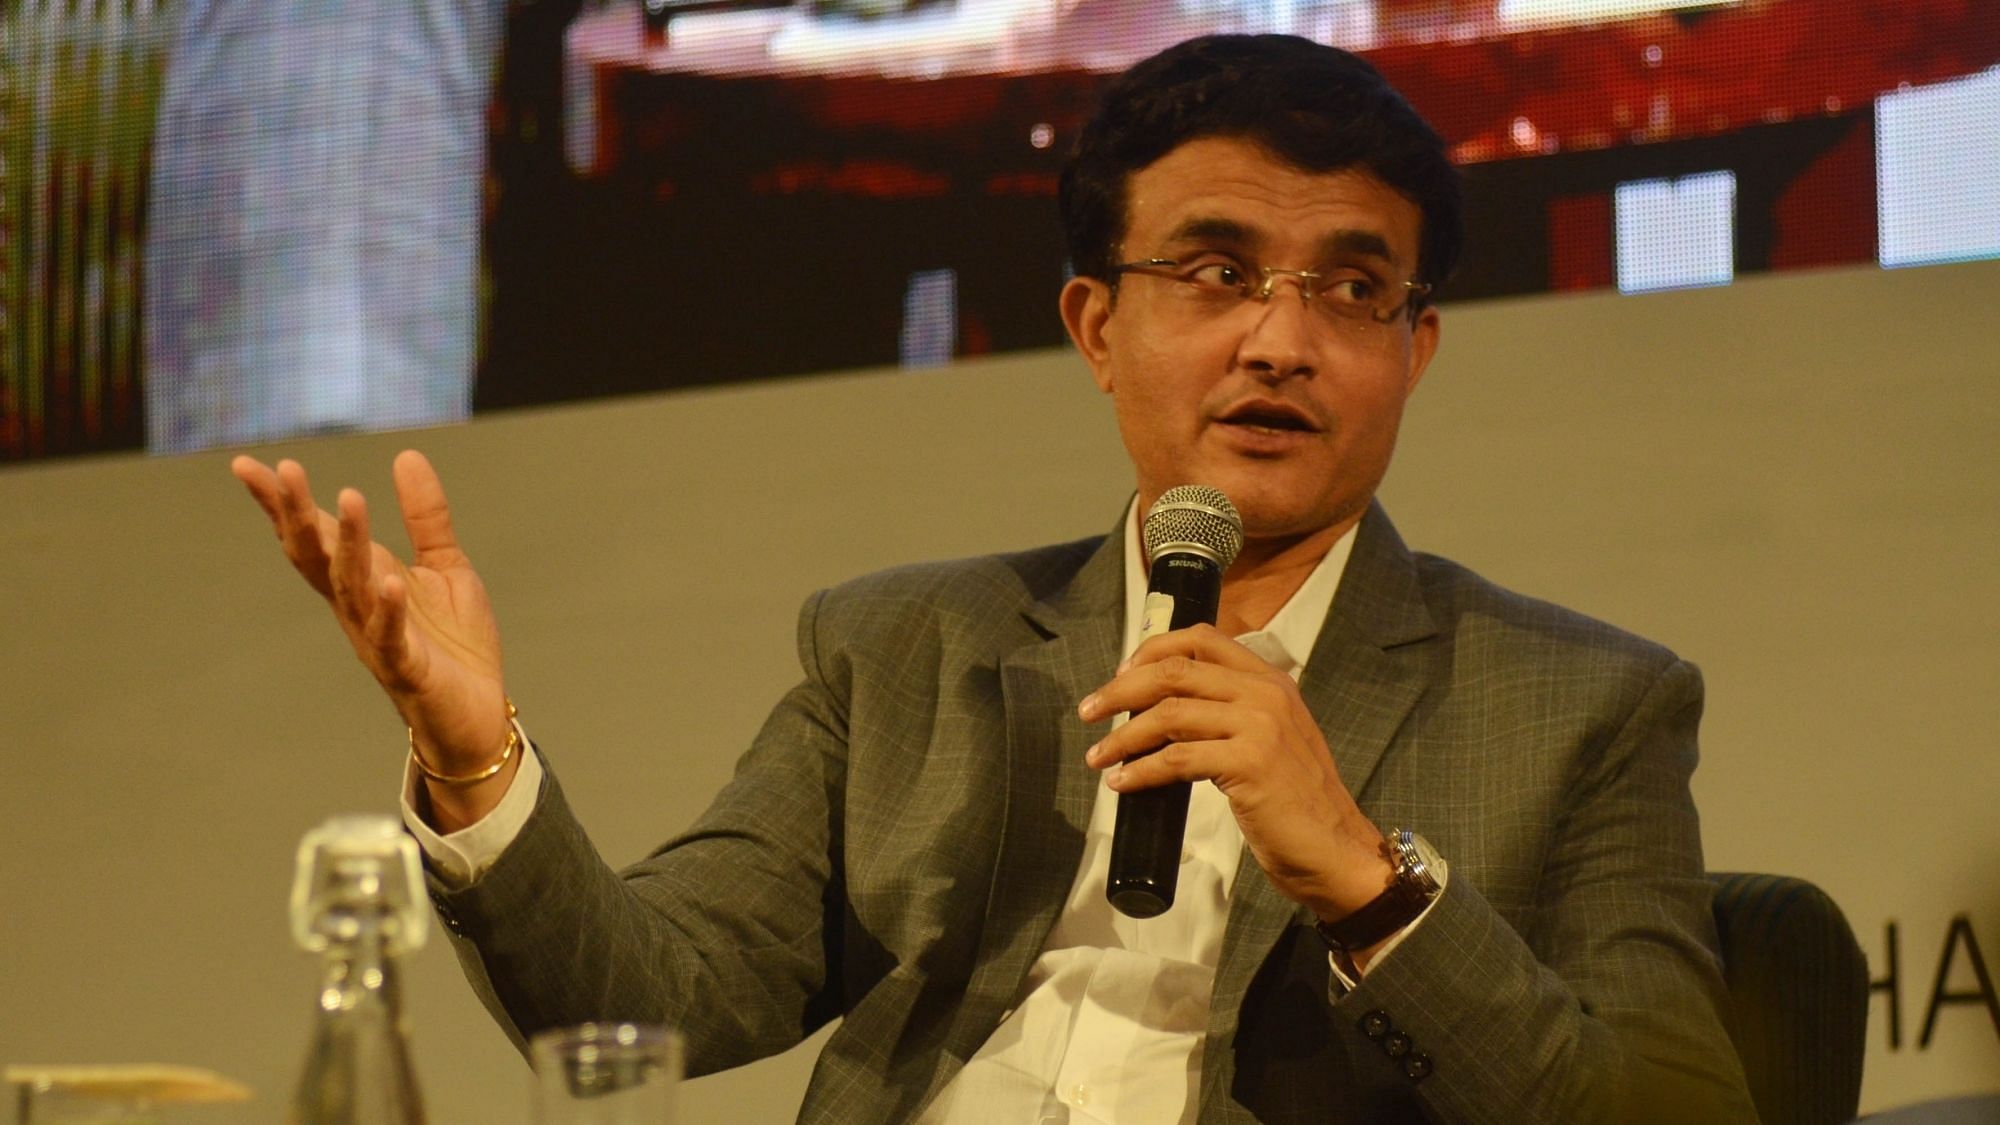 Former India captain Sourav Ganguly did not want to compare Steve Smith and Virat Kohli.